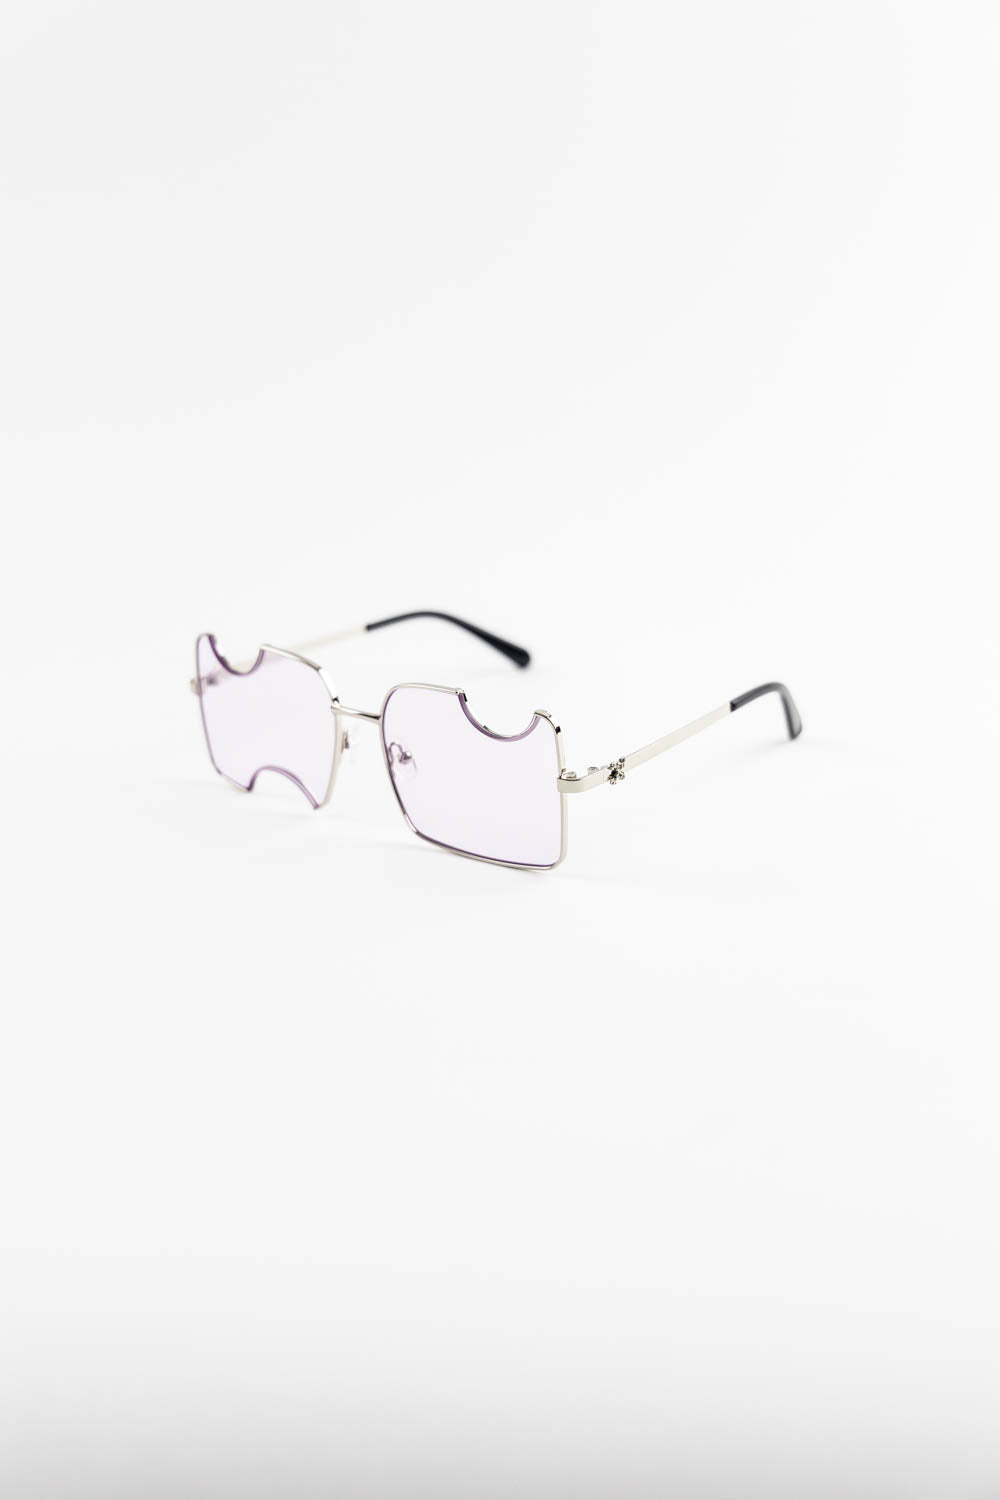 Off-White 142MM Cady Cut-Out Sunglasses - ShopStyle